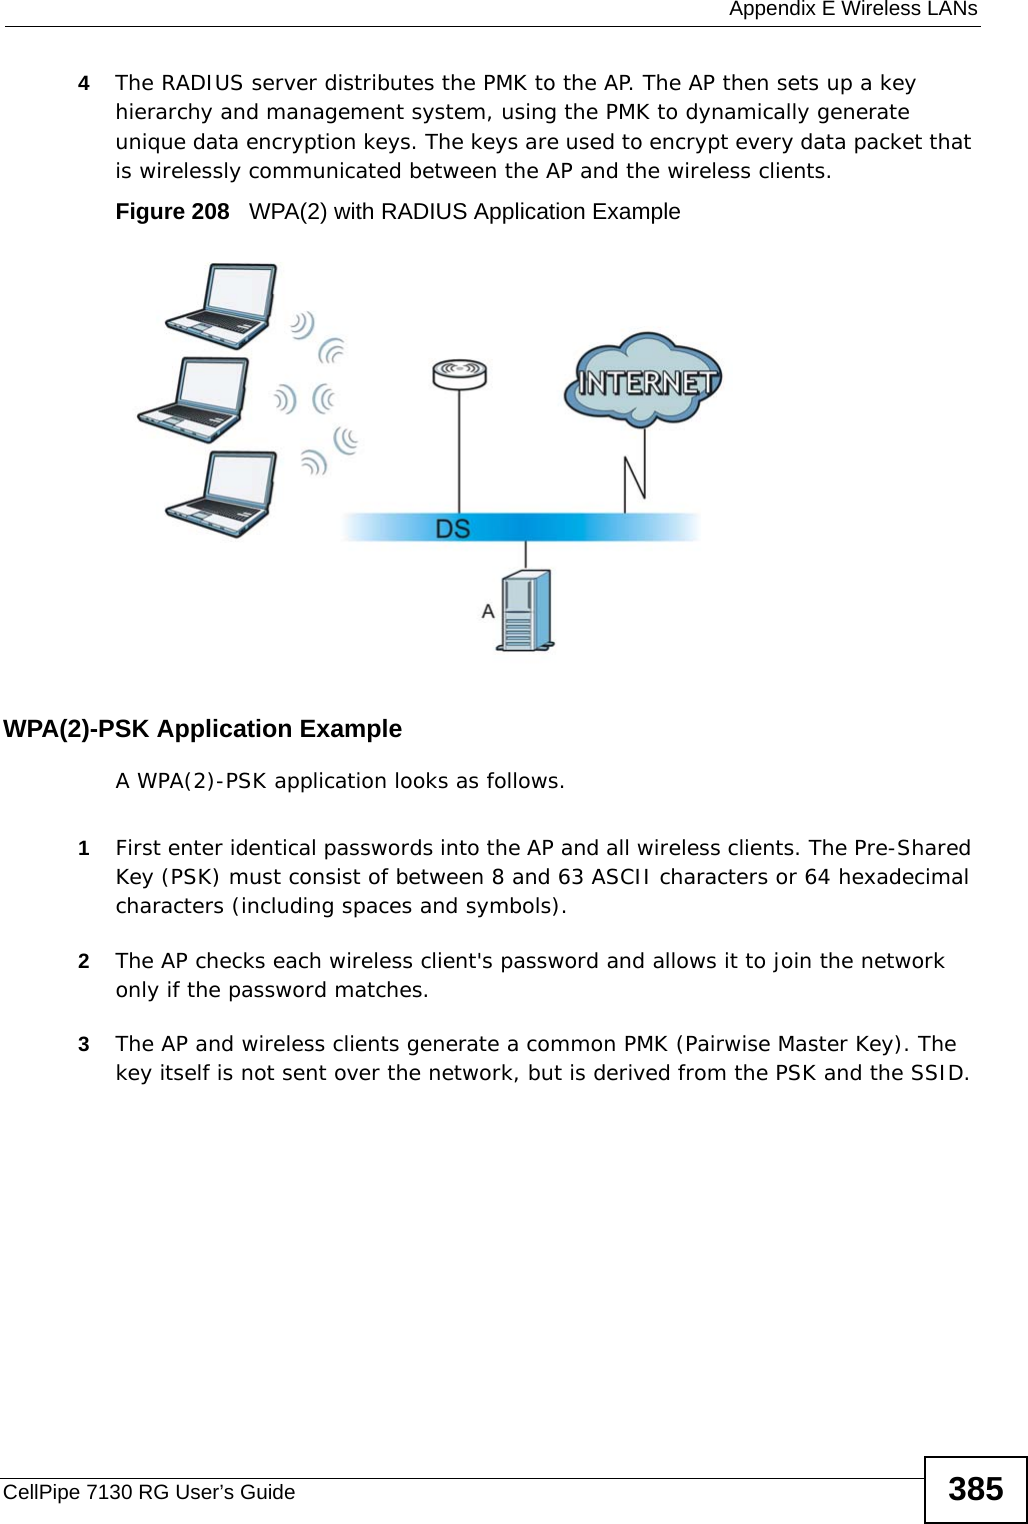  Appendix E Wireless LANsCellPipe 7130 RG User’s Guide 3854The RADIUS server distributes the PMK to the AP. The AP then sets up a key hierarchy and management system, using the PMK to dynamically generate unique data encryption keys. The keys are used to encrypt every data packet that is wirelessly communicated between the AP and the wireless clients.Figure 208   WPA(2) with RADIUS Application ExampleWPA(2)-PSK Application ExampleA WPA(2)-PSK application looks as follows.1First enter identical passwords into the AP and all wireless clients. The Pre-Shared Key (PSK) must consist of between 8 and 63 ASCII characters or 64 hexadecimal characters (including spaces and symbols).2The AP checks each wireless client&apos;s password and allows it to join the network only if the password matches.3The AP and wireless clients generate a common PMK (Pairwise Master Key). The key itself is not sent over the network, but is derived from the PSK and the SSID. 